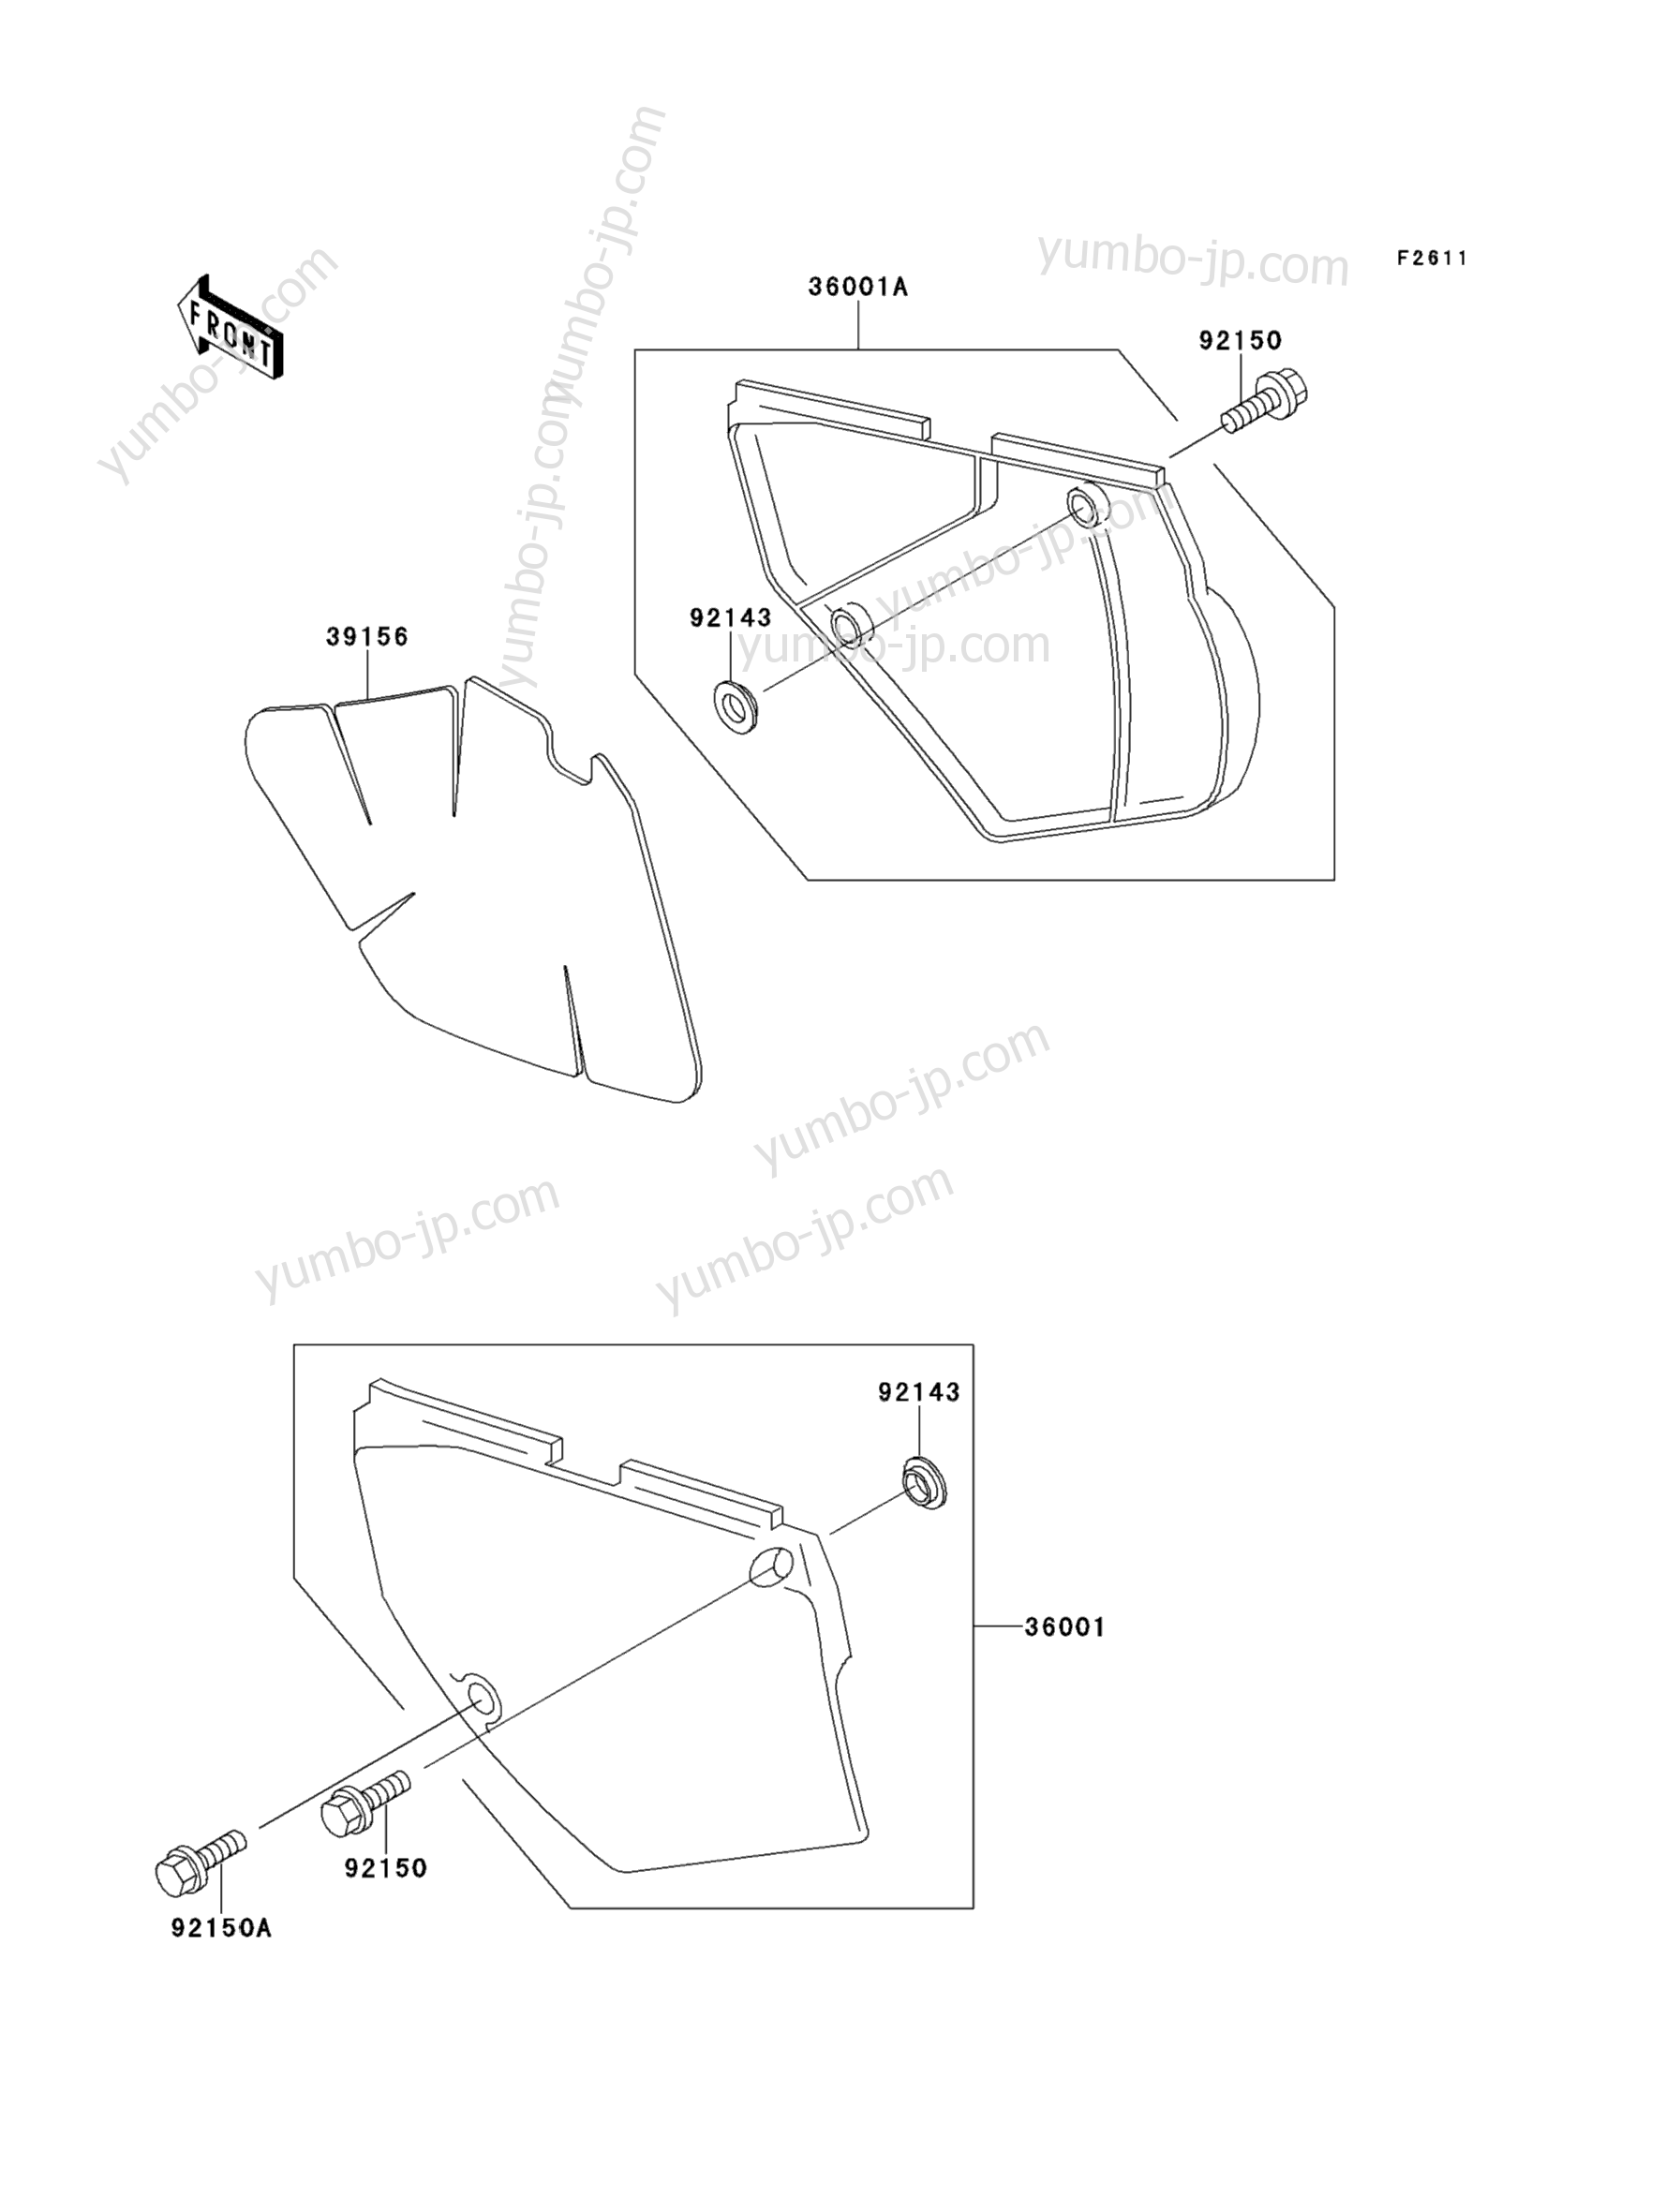 SIDE COVERS for motorcycles KAWASAKI KLX650R (KLX650-D1) 1996 year